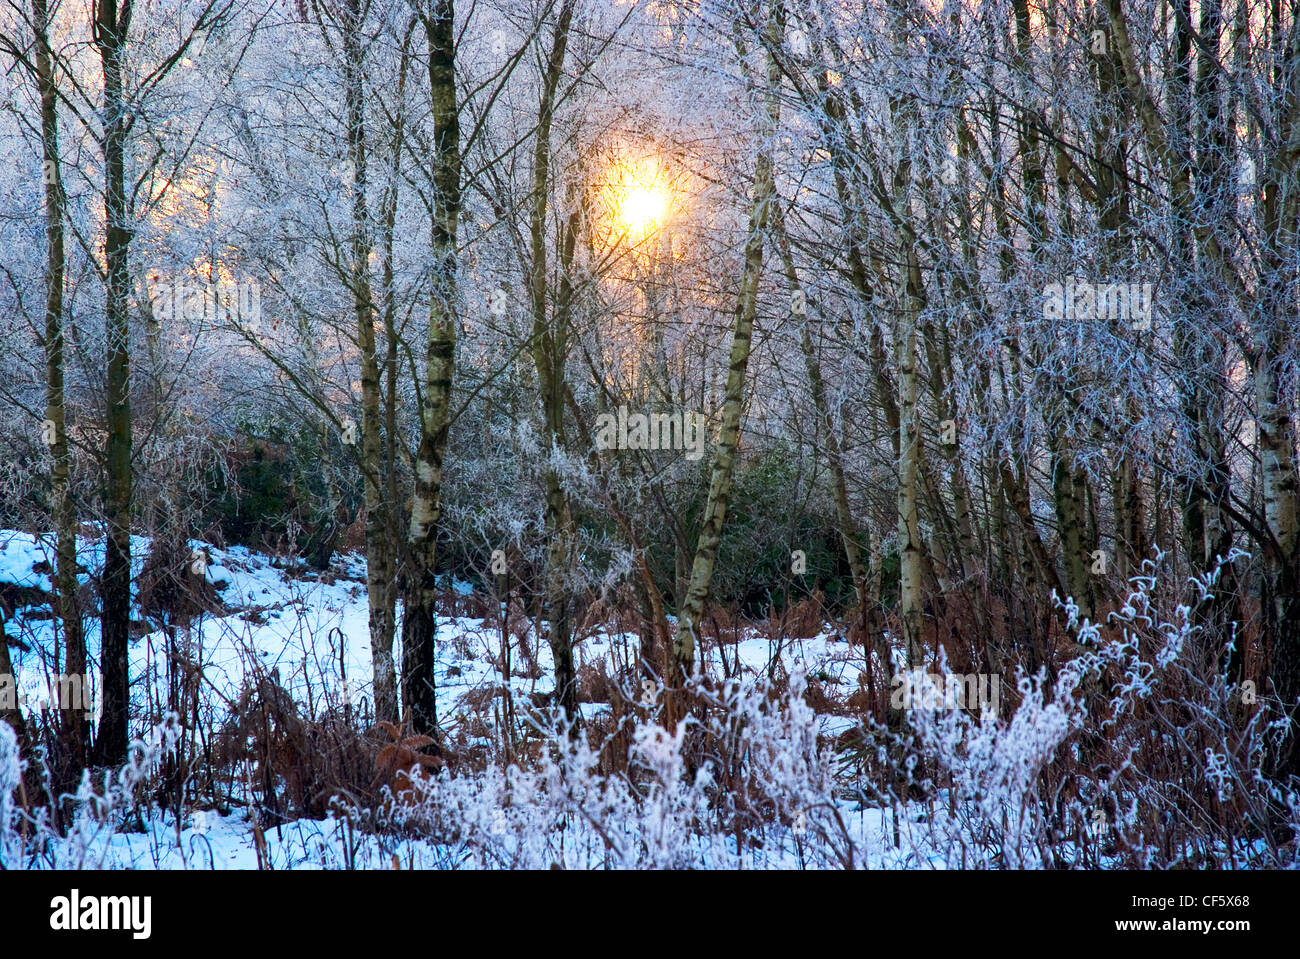 A watery sun illuminating silver birch trees in snow near Coldharbour. Stock Photo